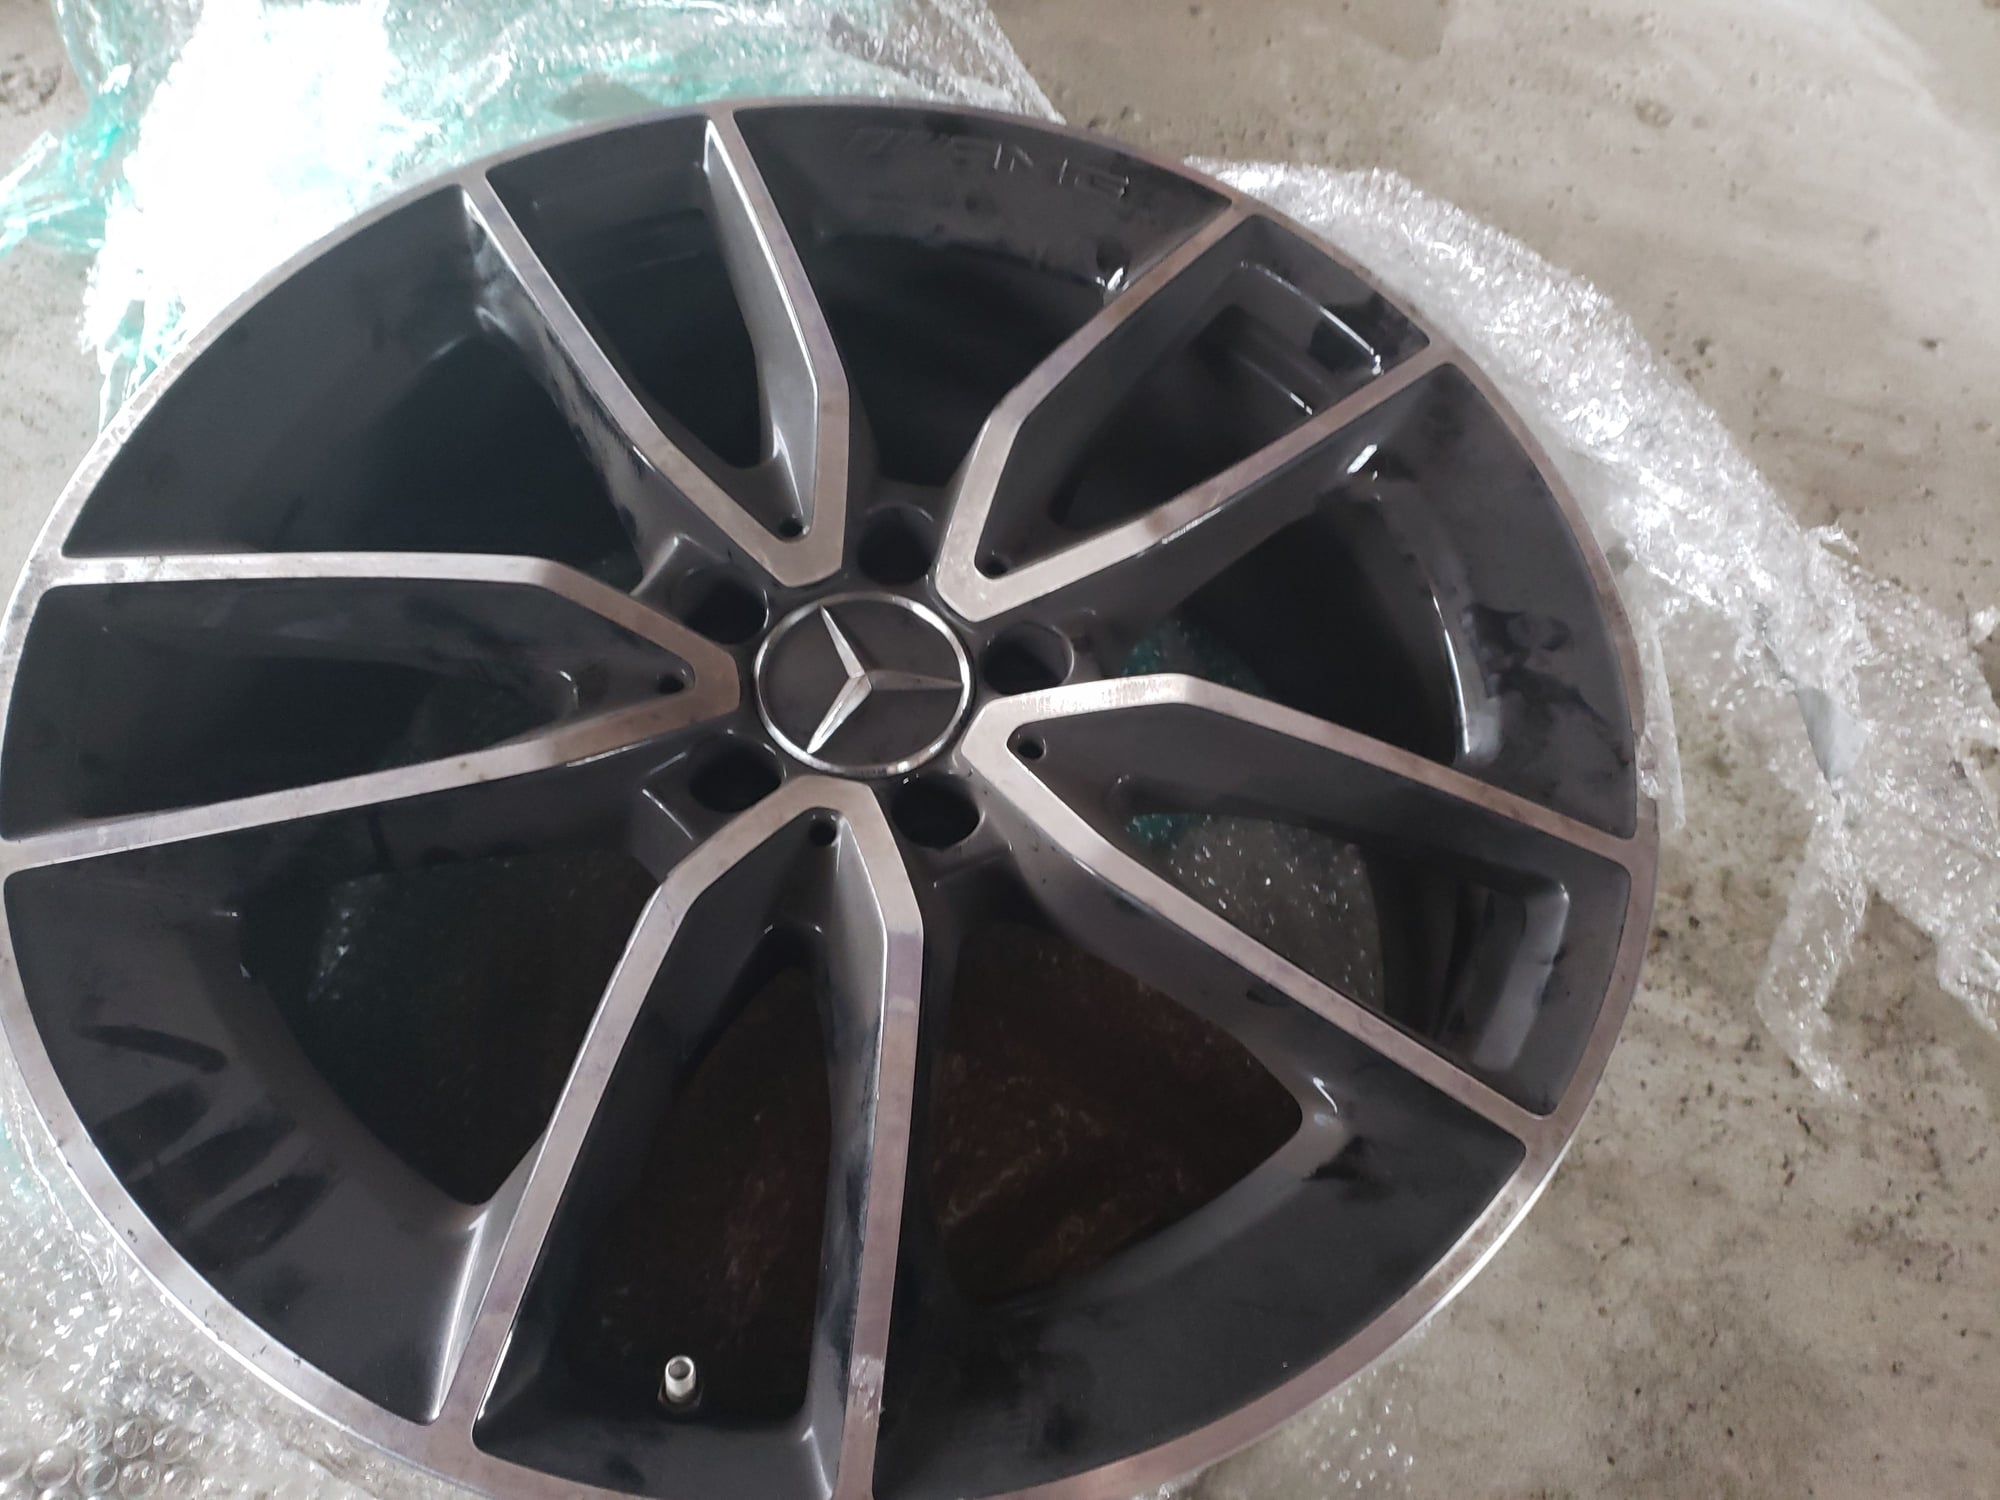 Wheels and Tires/Axles - Selling 19 inch C43 Rims - Used - 2019 to 2021 Mercedes-Benz C43 AMG - Clarence Center, NY 14032, United States